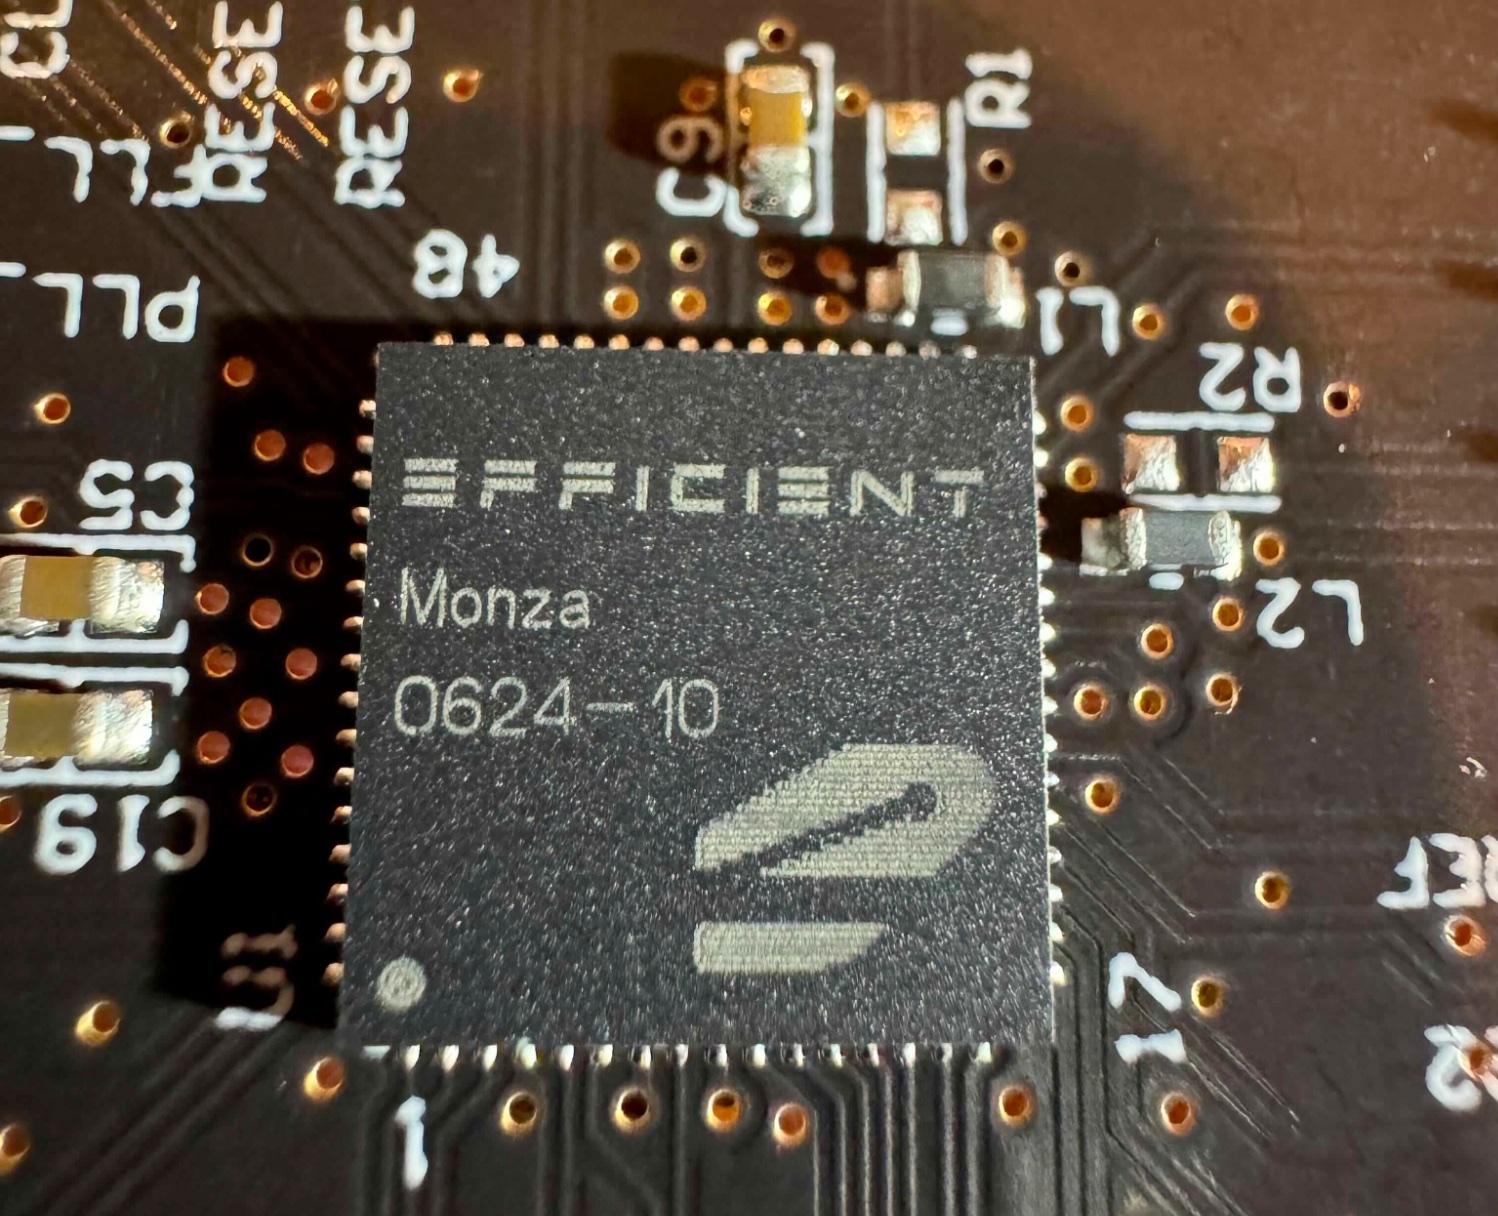 An image of our first silicon chip, Monza